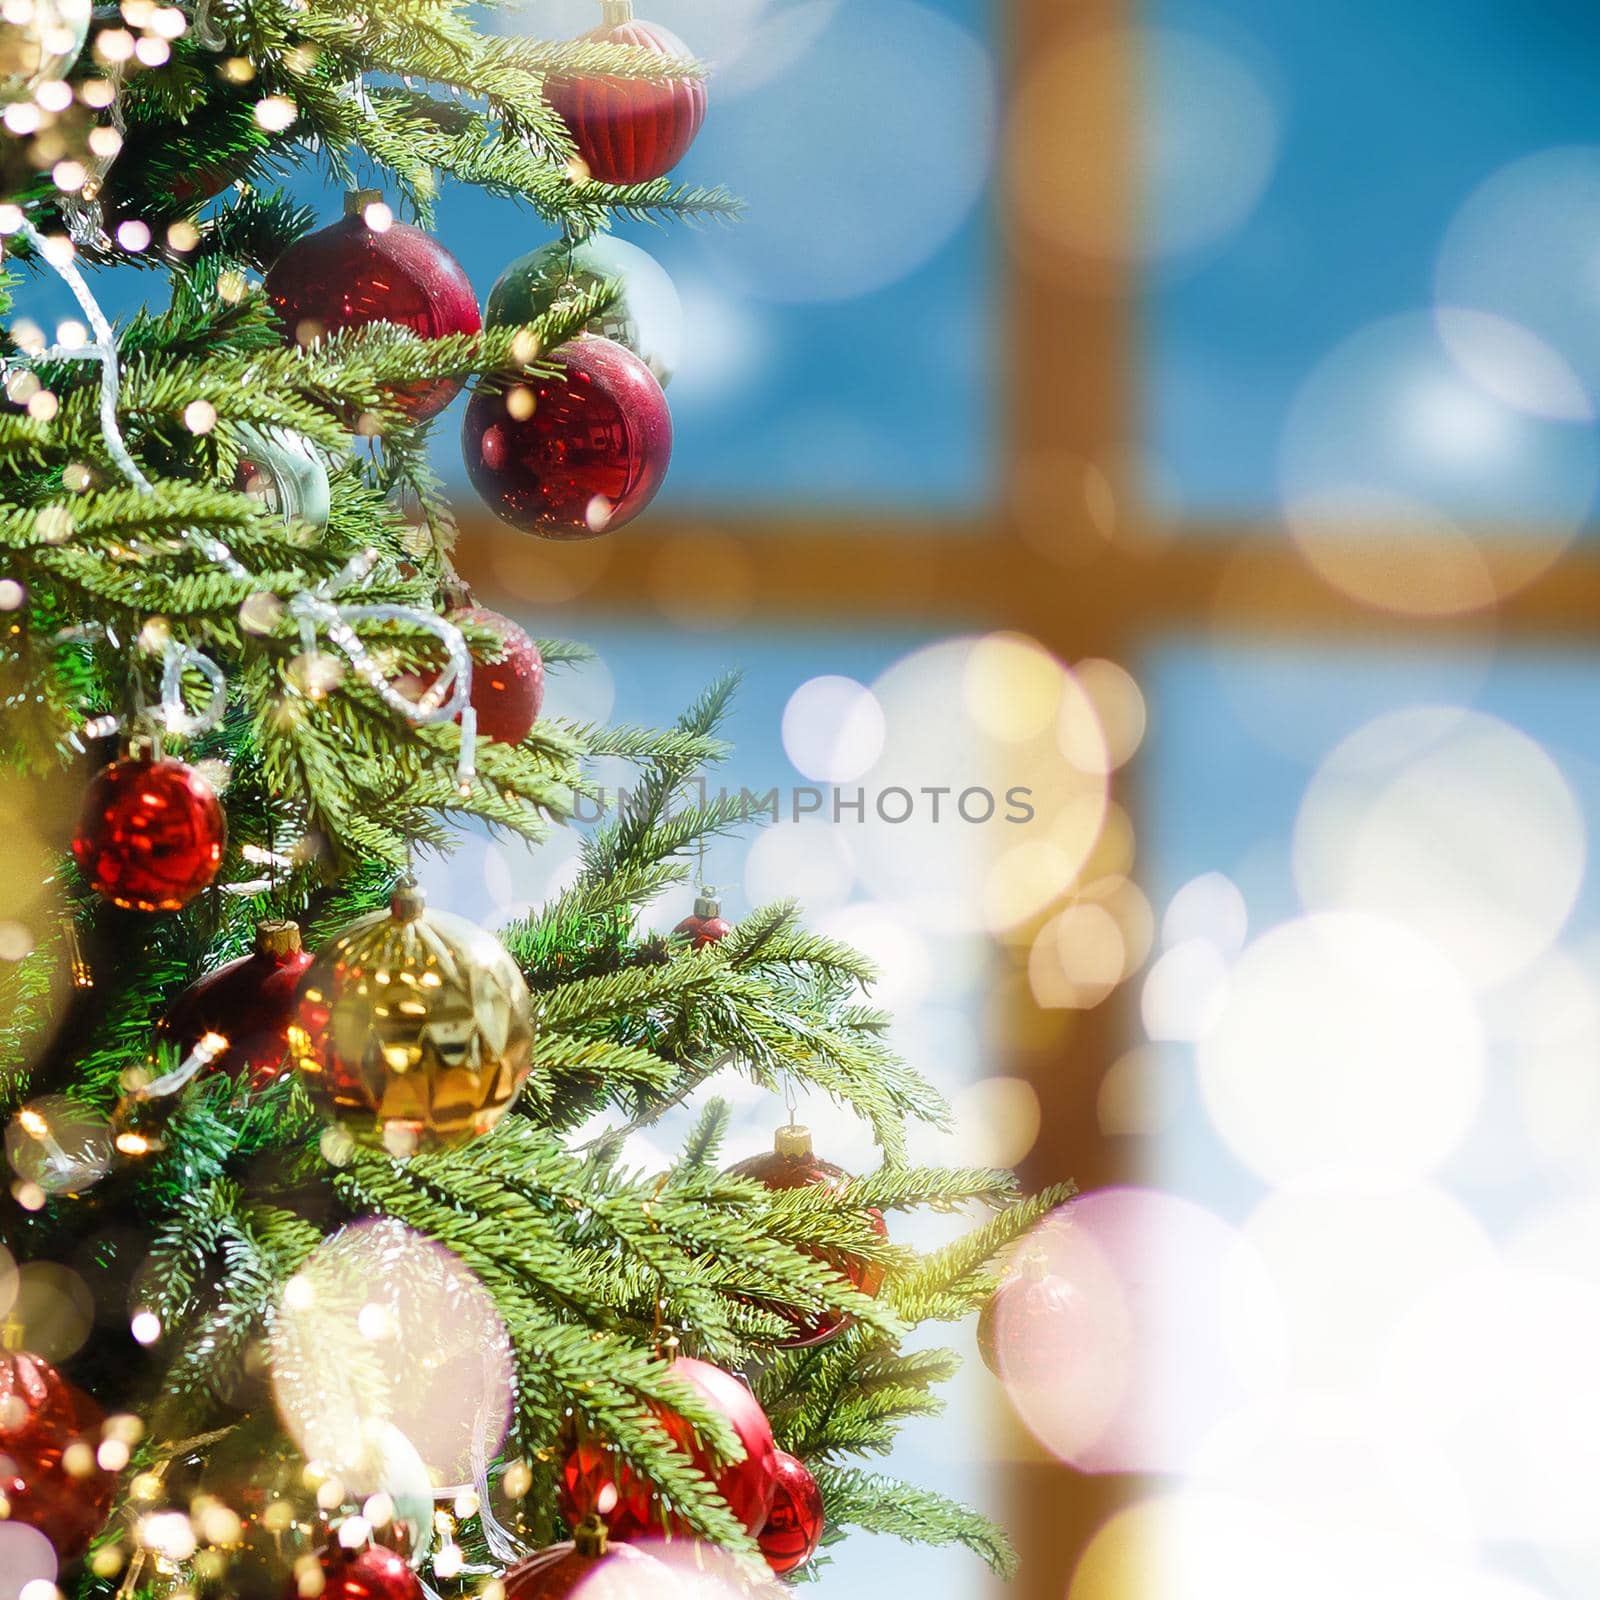 Closeup of red bauble hanging from a decorated Christmas tree by Andelov13